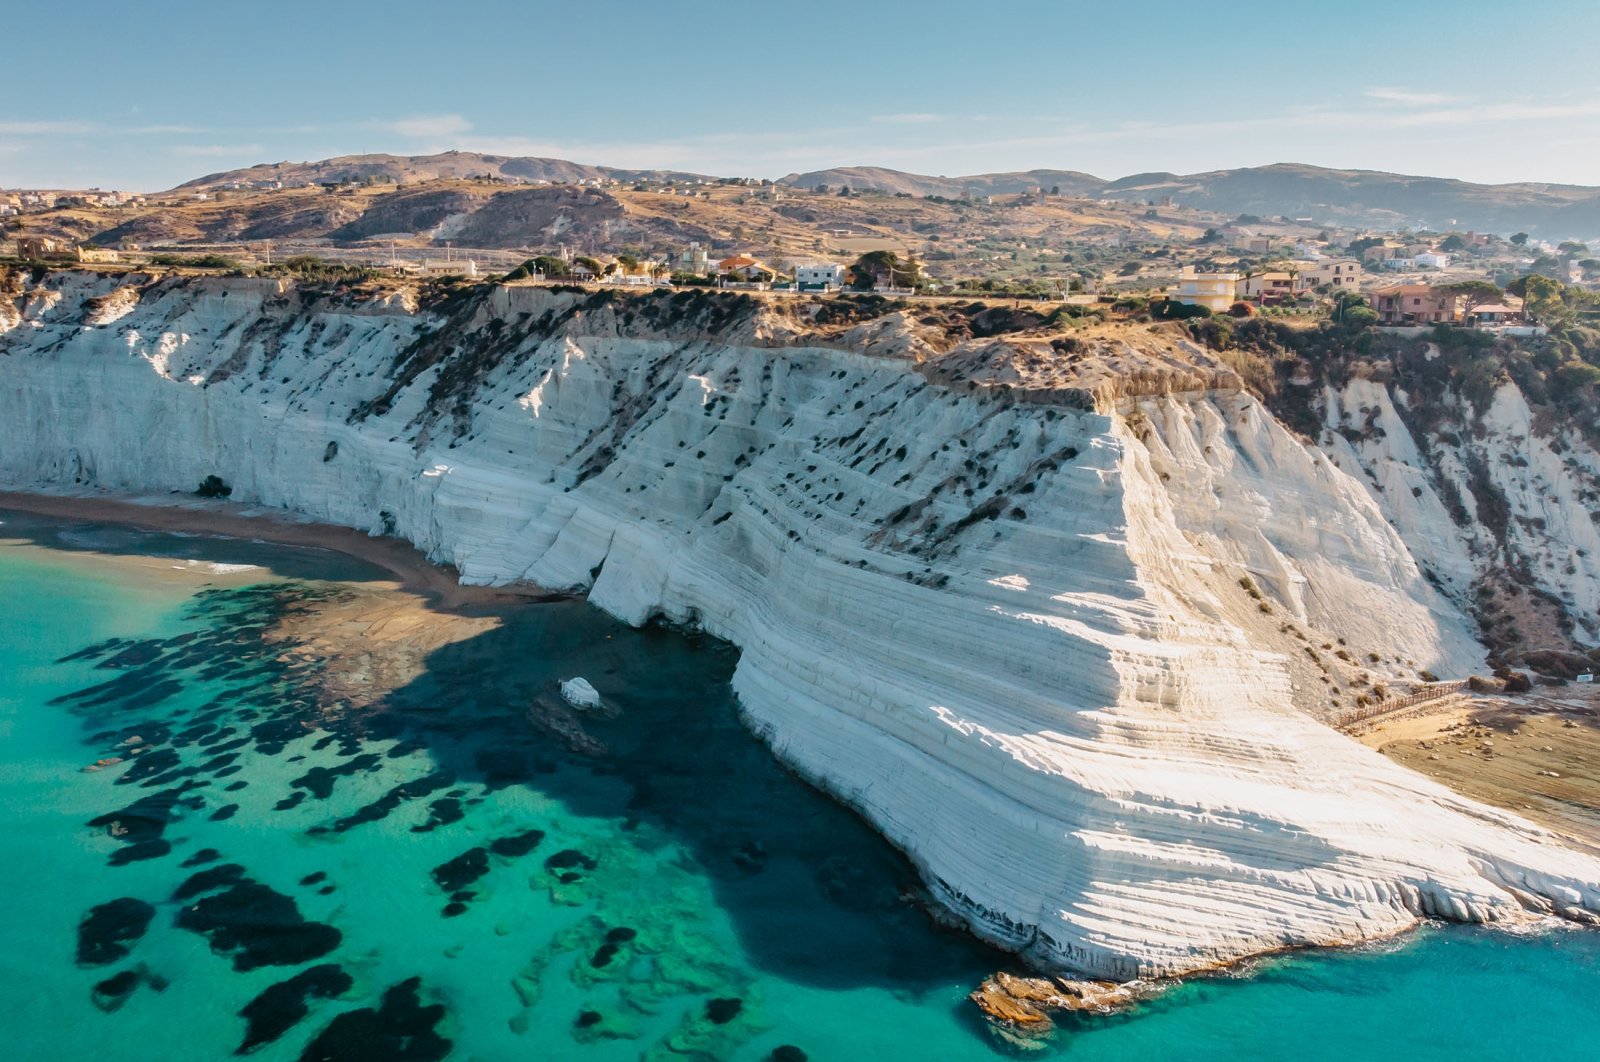 The white rocky cliffs of Scala dei Turchi is a must see of Sicilian seaside tourism. (Shutterstock Photo)